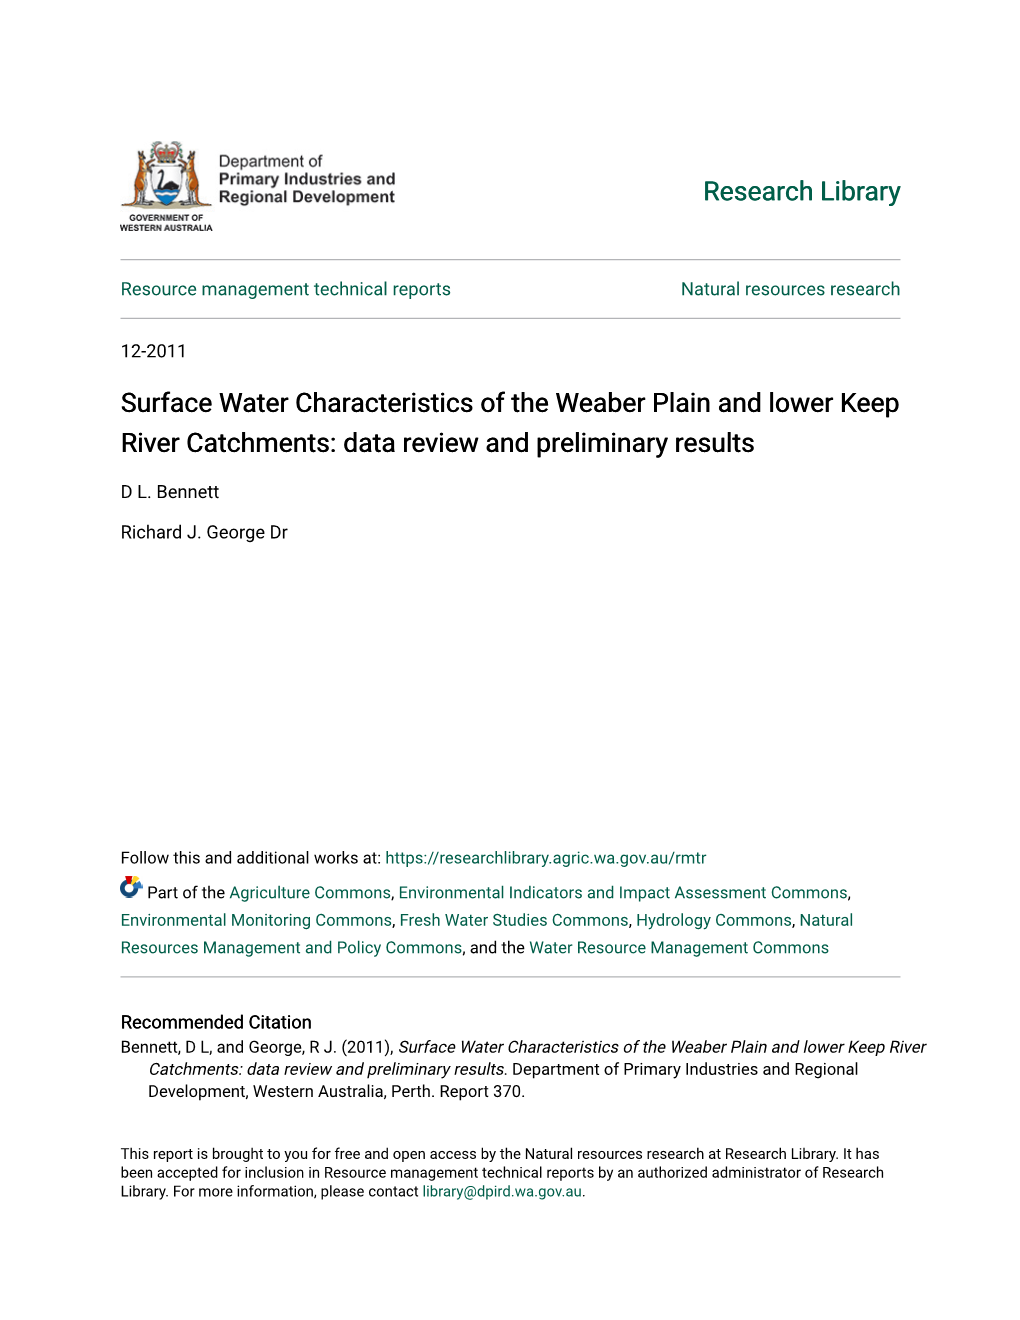 Surface Water Characteristics of the Weaber Plain and Lower Keep River Catchments: Data Review and Preliminary Results